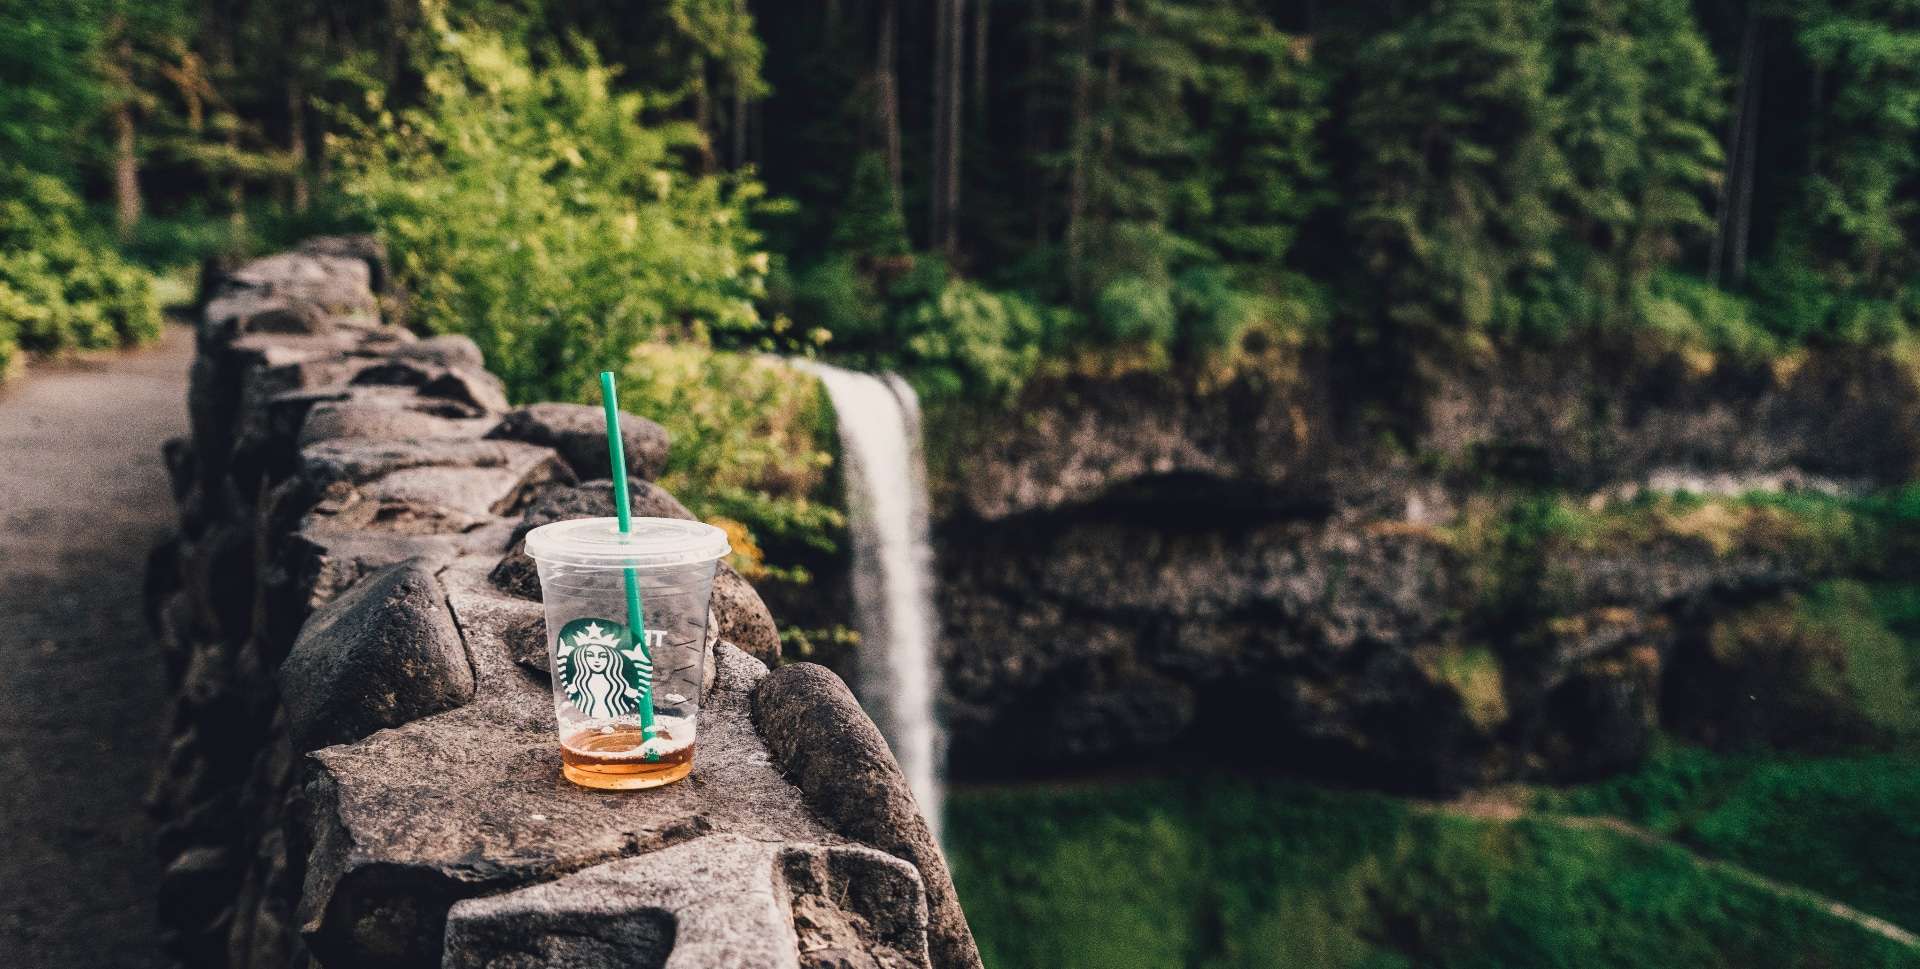 A carelessly discarded single-use Starbucks coffee cup litters the view